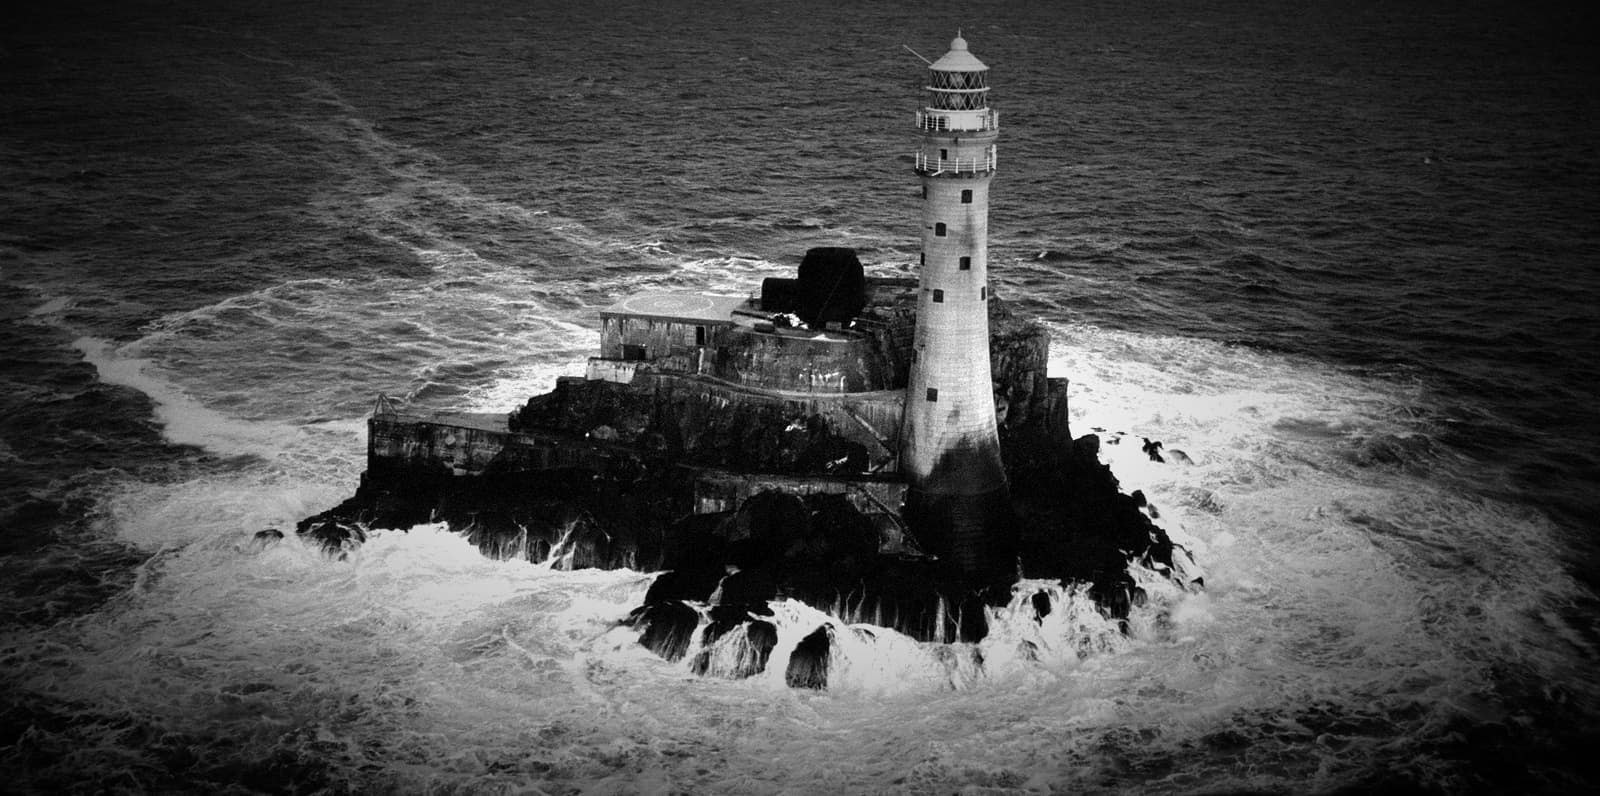 Fastnet rock and lighthouse